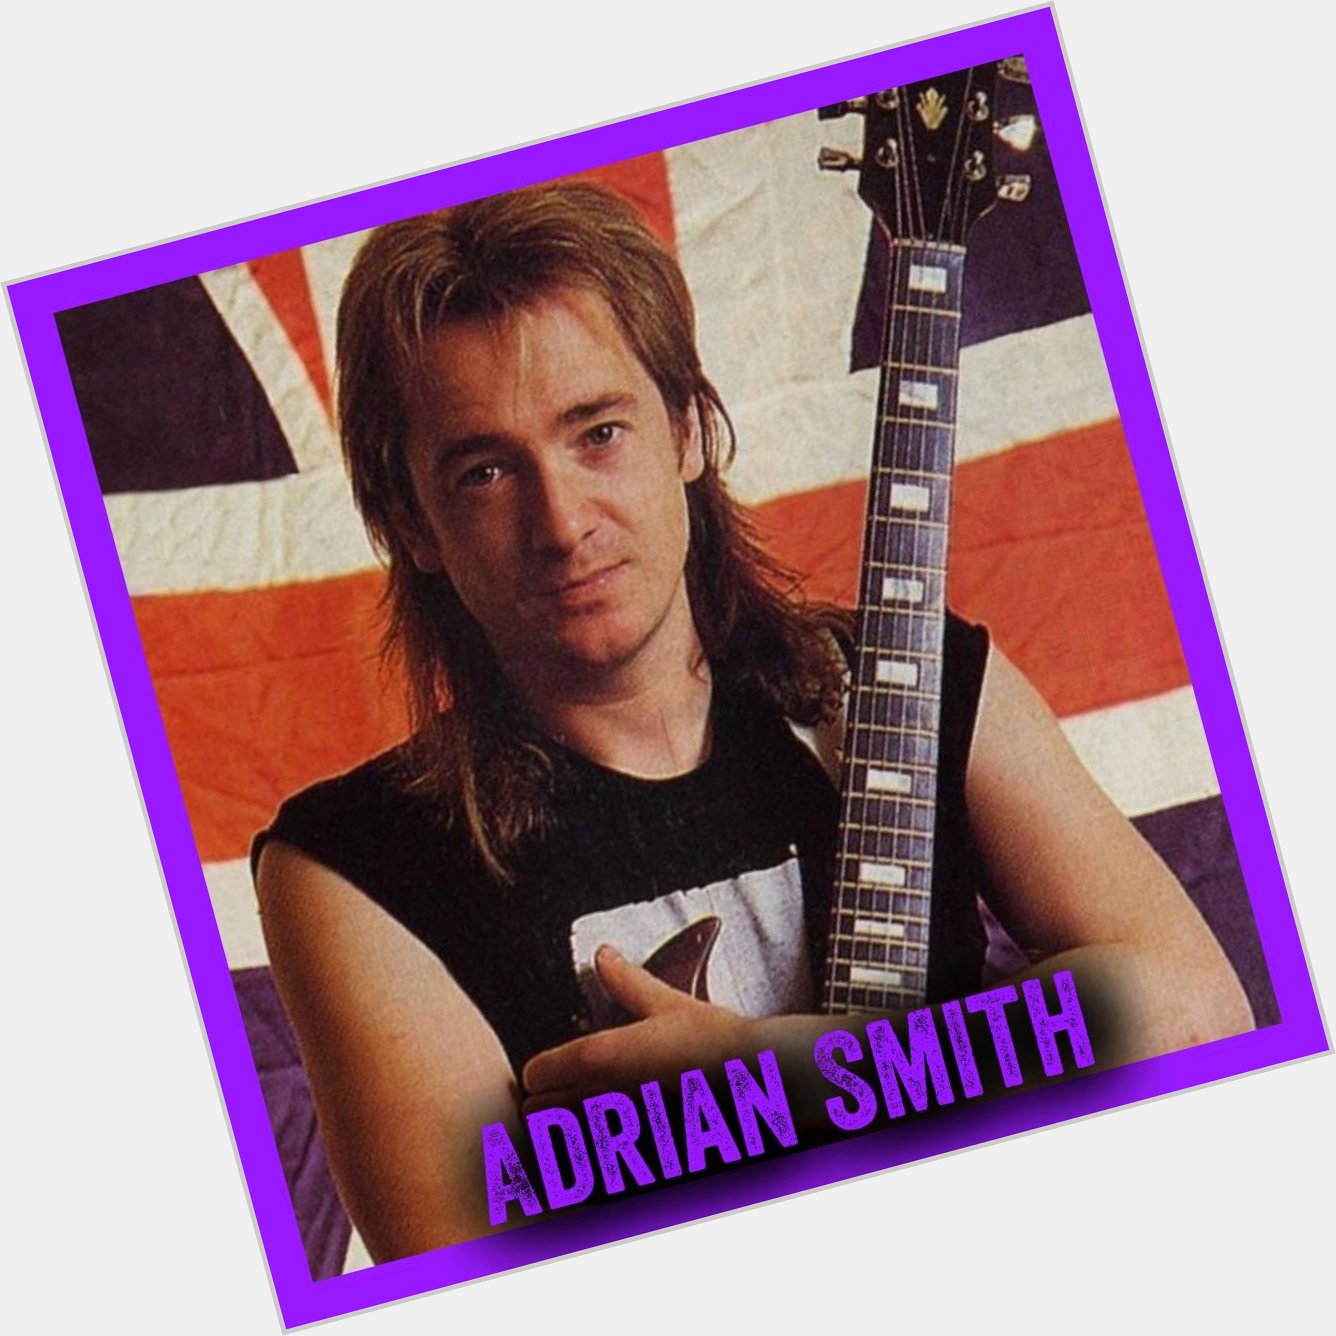 We would never miss the opportunity to wish  Adrian Smith of a very Happy Birthday   